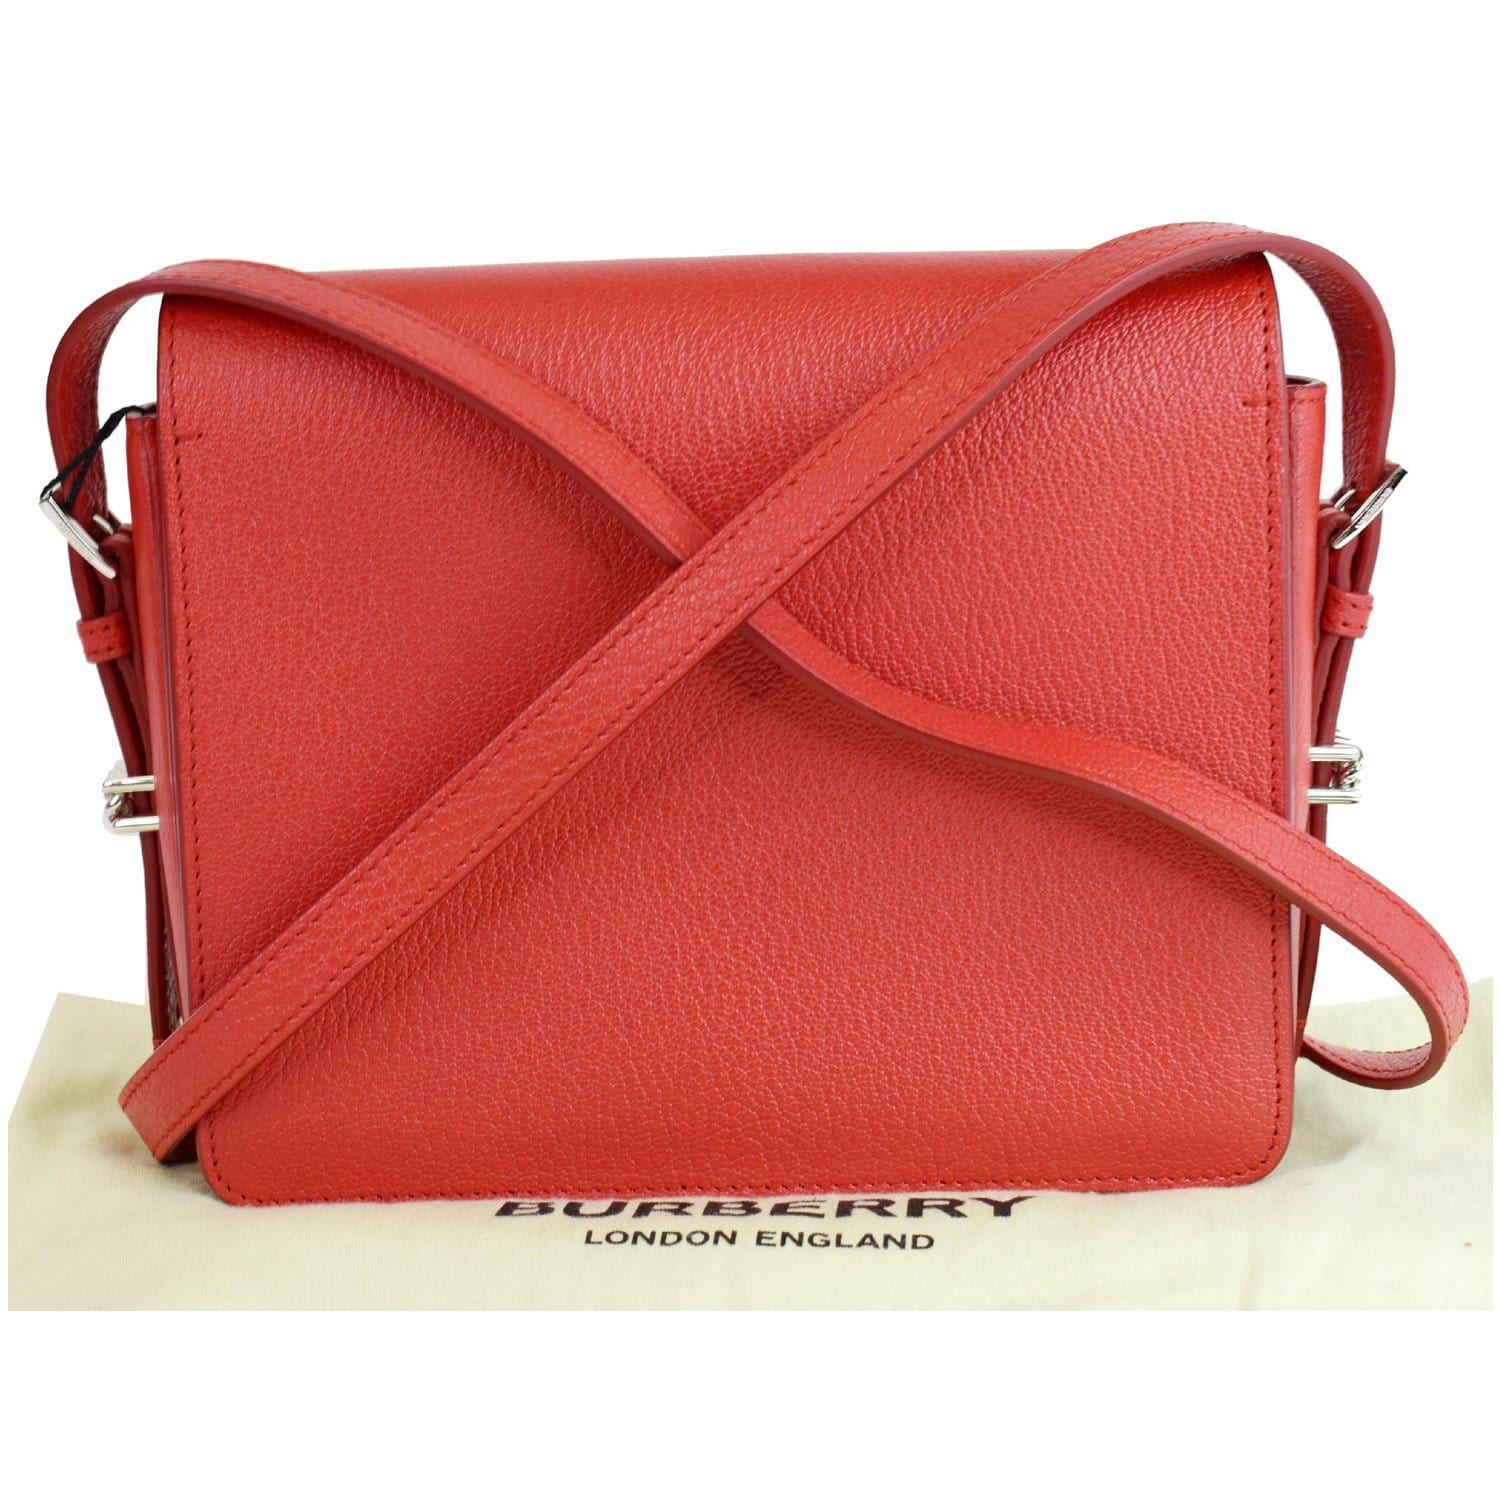 BURBERRY Small Leather Grace Bag Red Color - I-MAGAZINE Inc